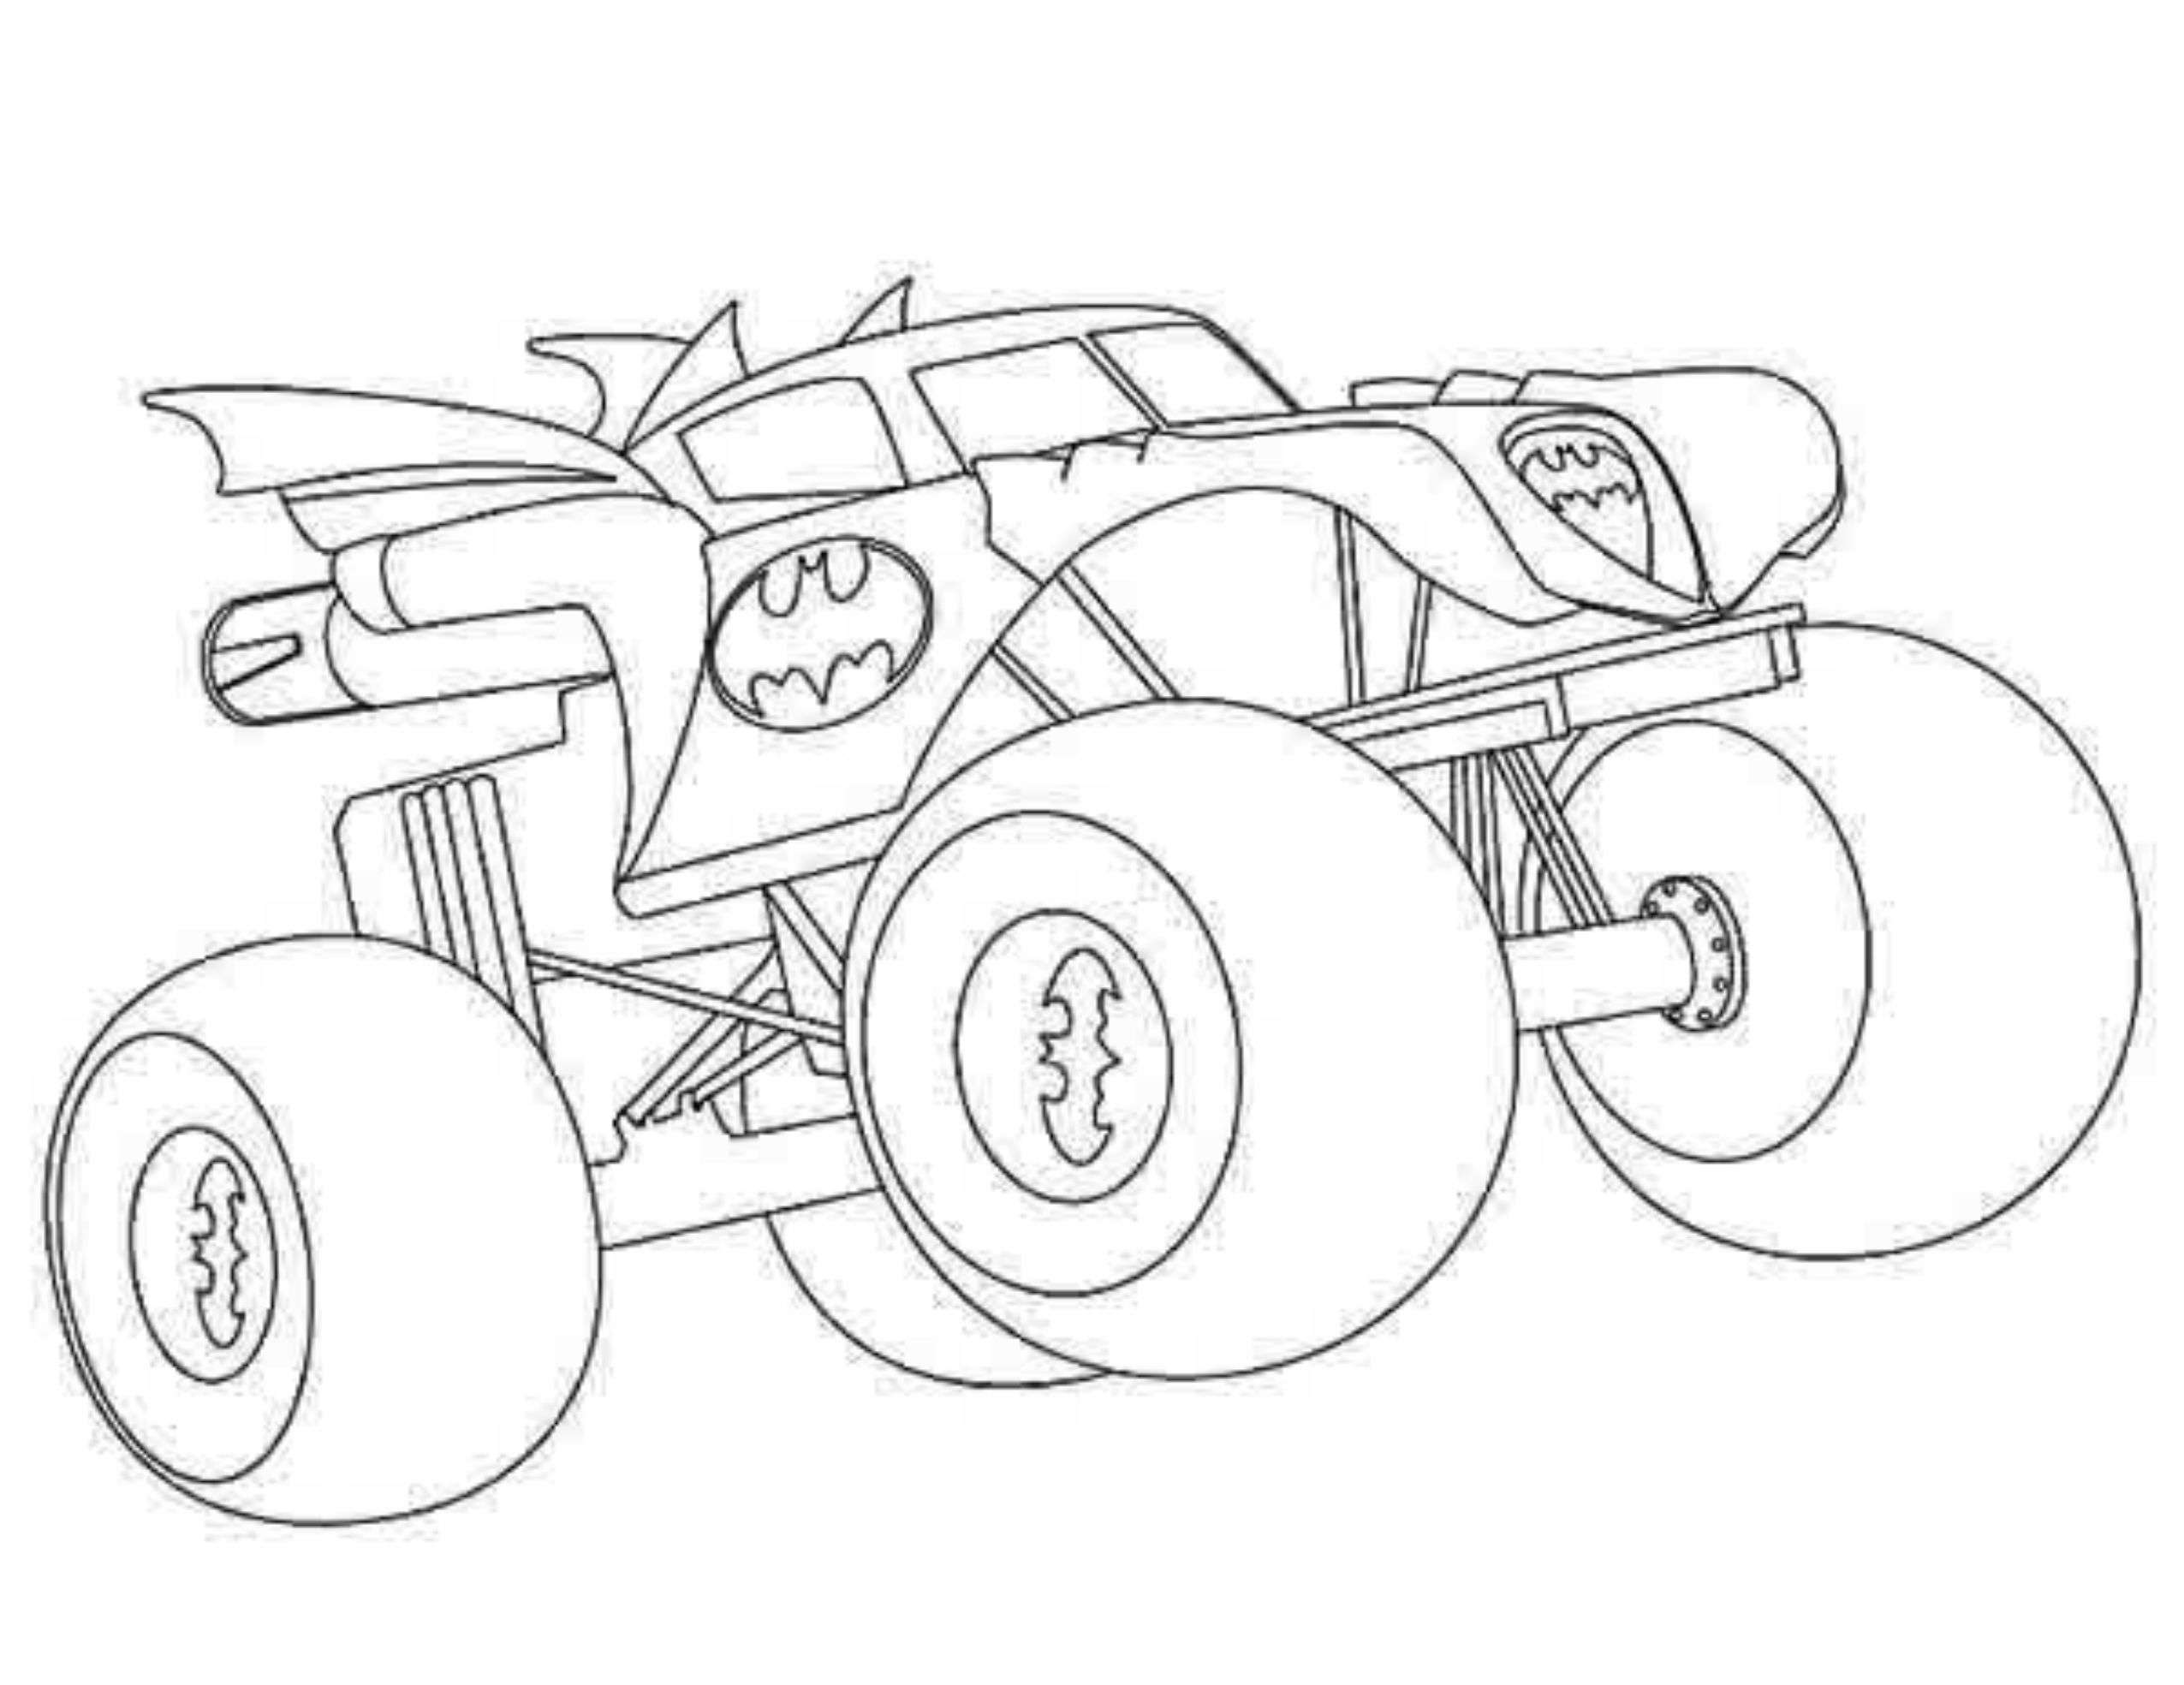 Free monster jam monster truck coloring pages with Monster Jam